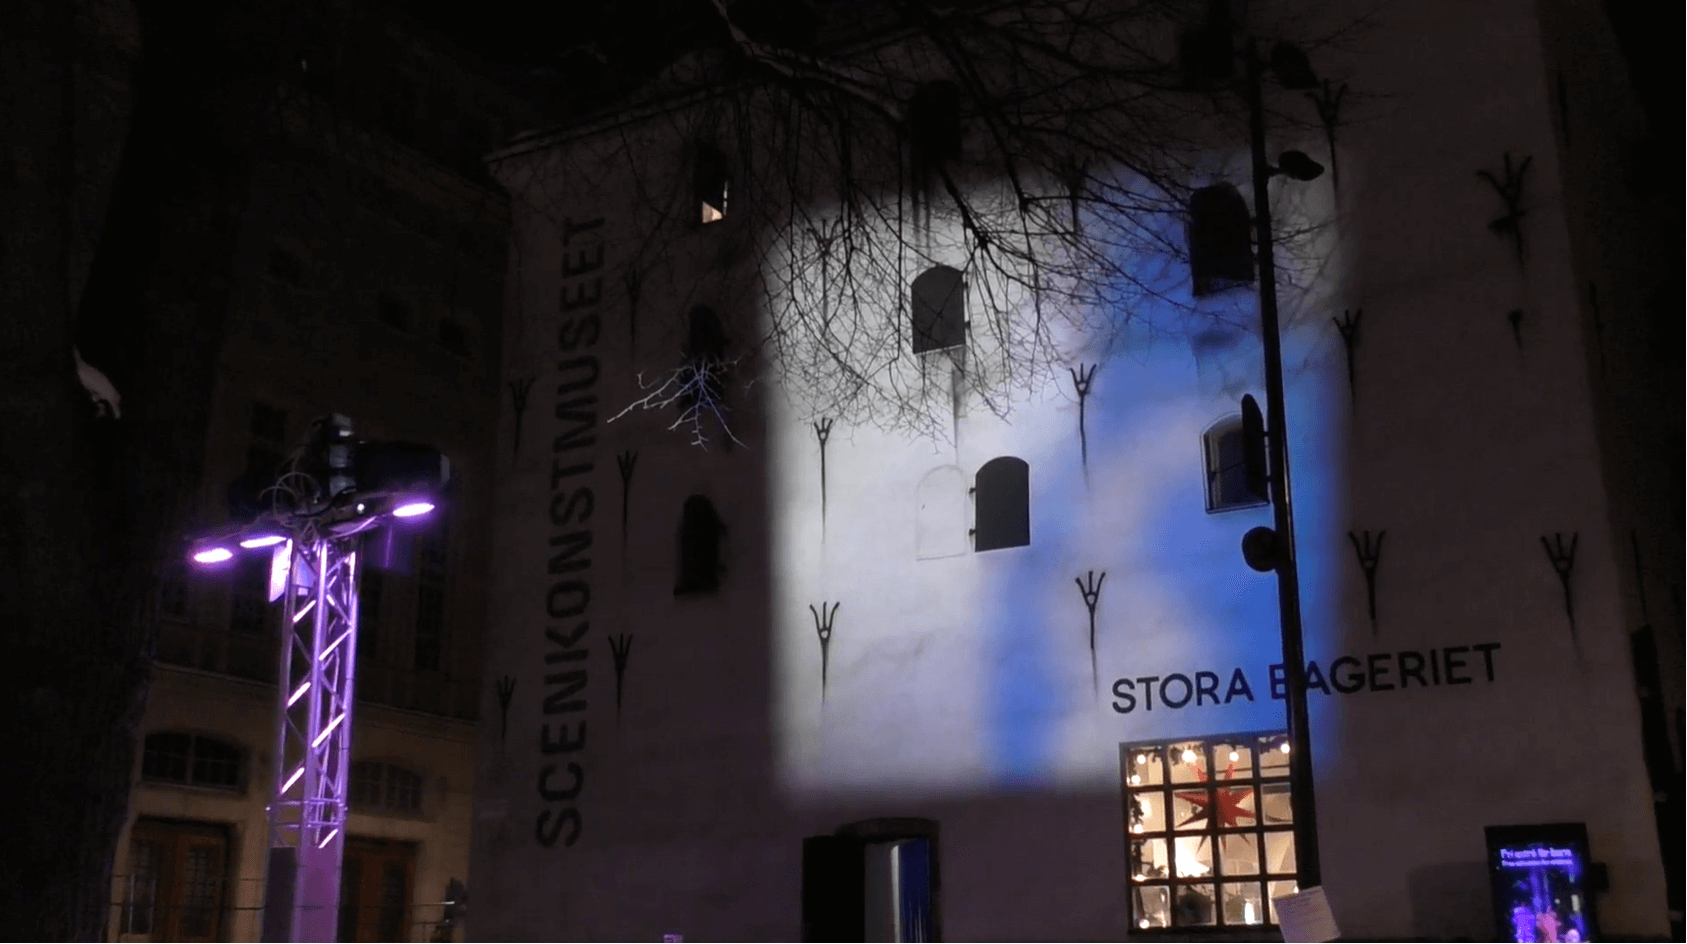 Pictures of the installation at Scenkonstmuseet